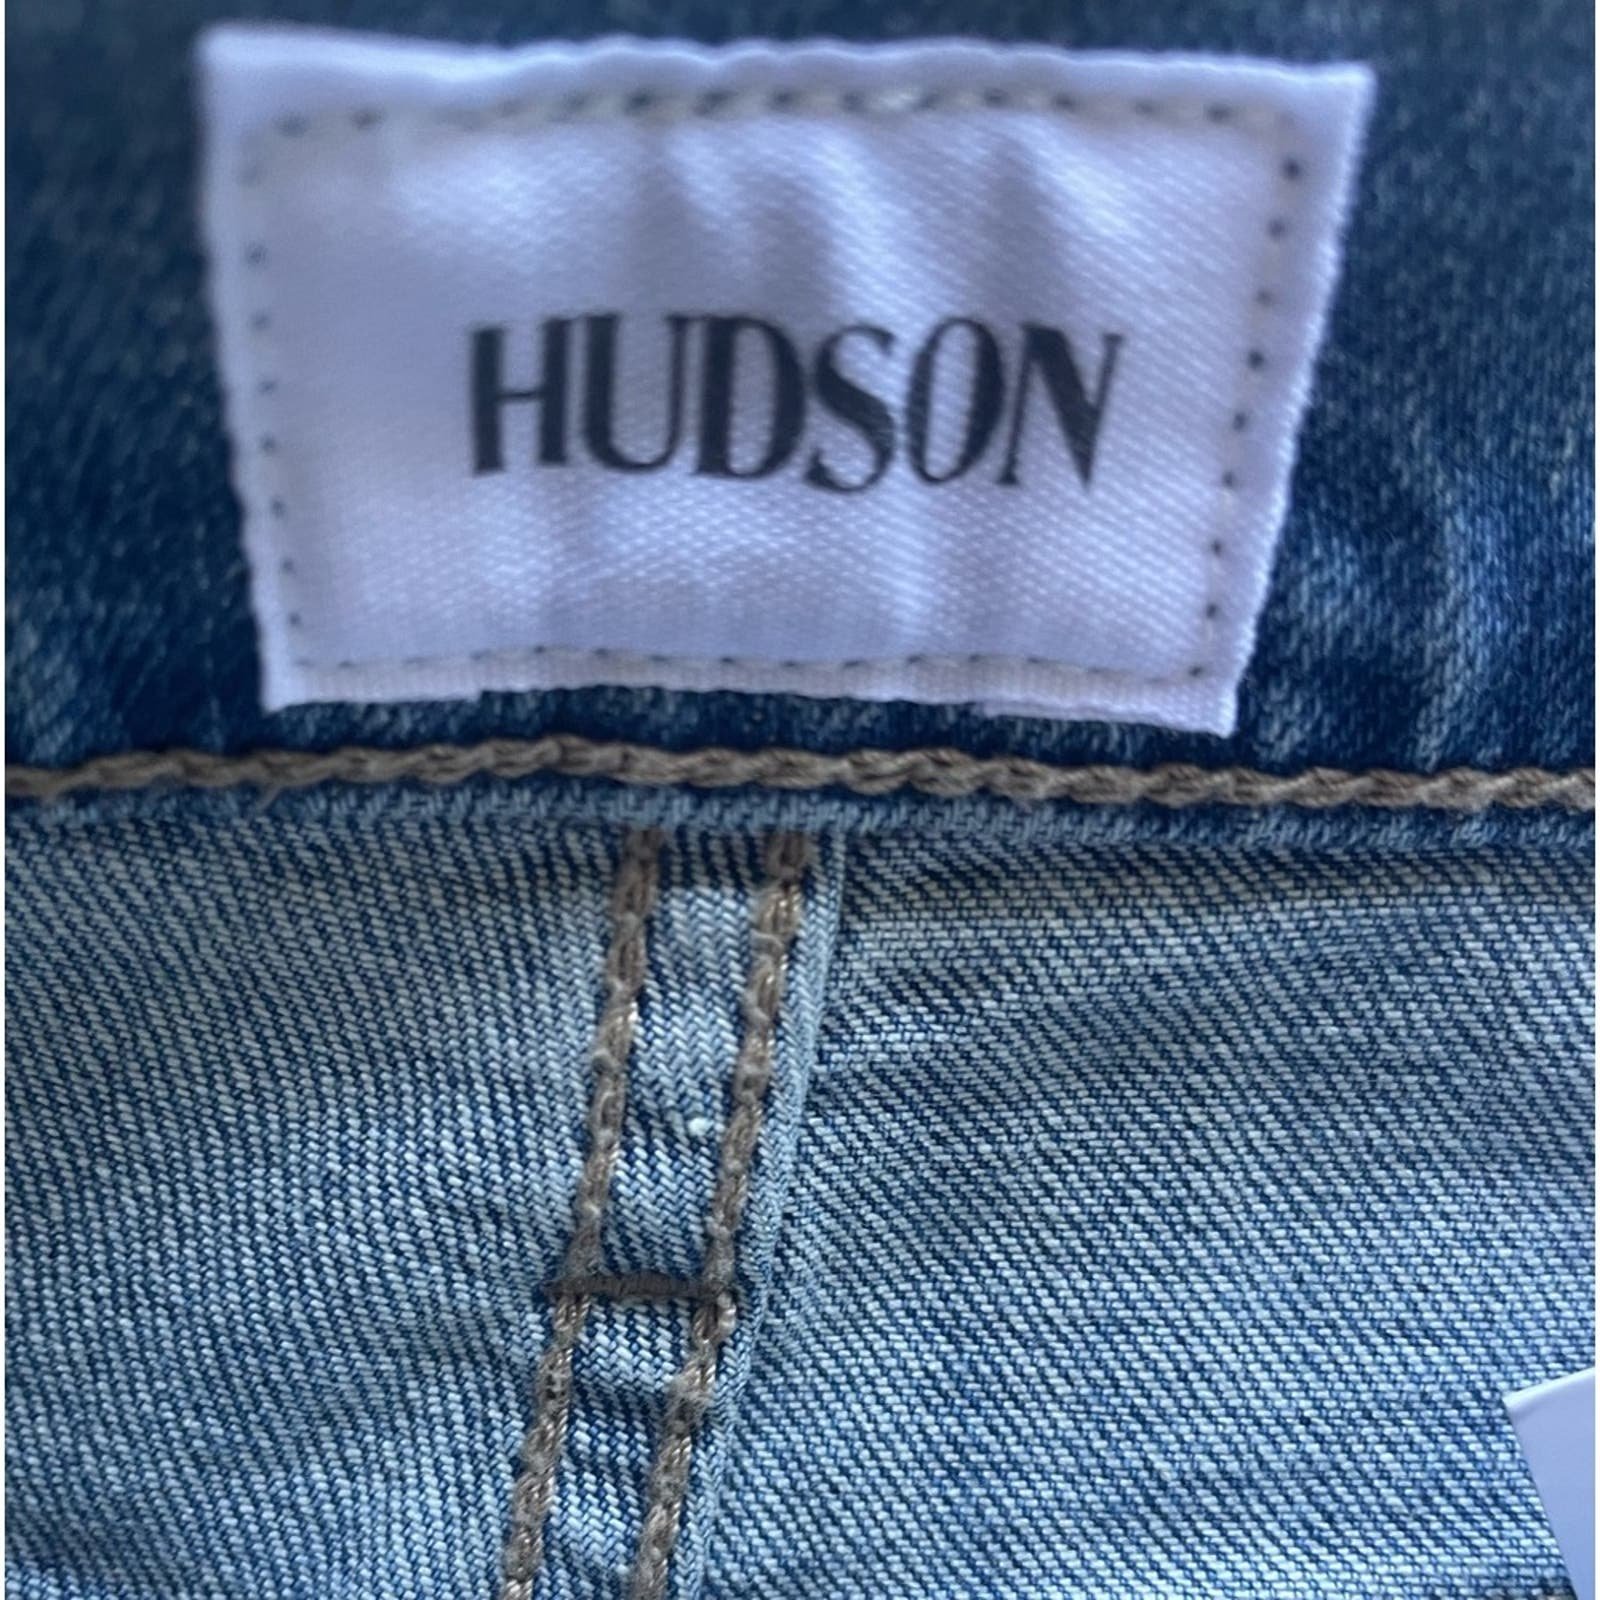 save up to 70% Hudson Jeans Noa Mid-Rise 90’s Baggy Crop Jean Women´s Size 28 gluussmU1 outlet online shop